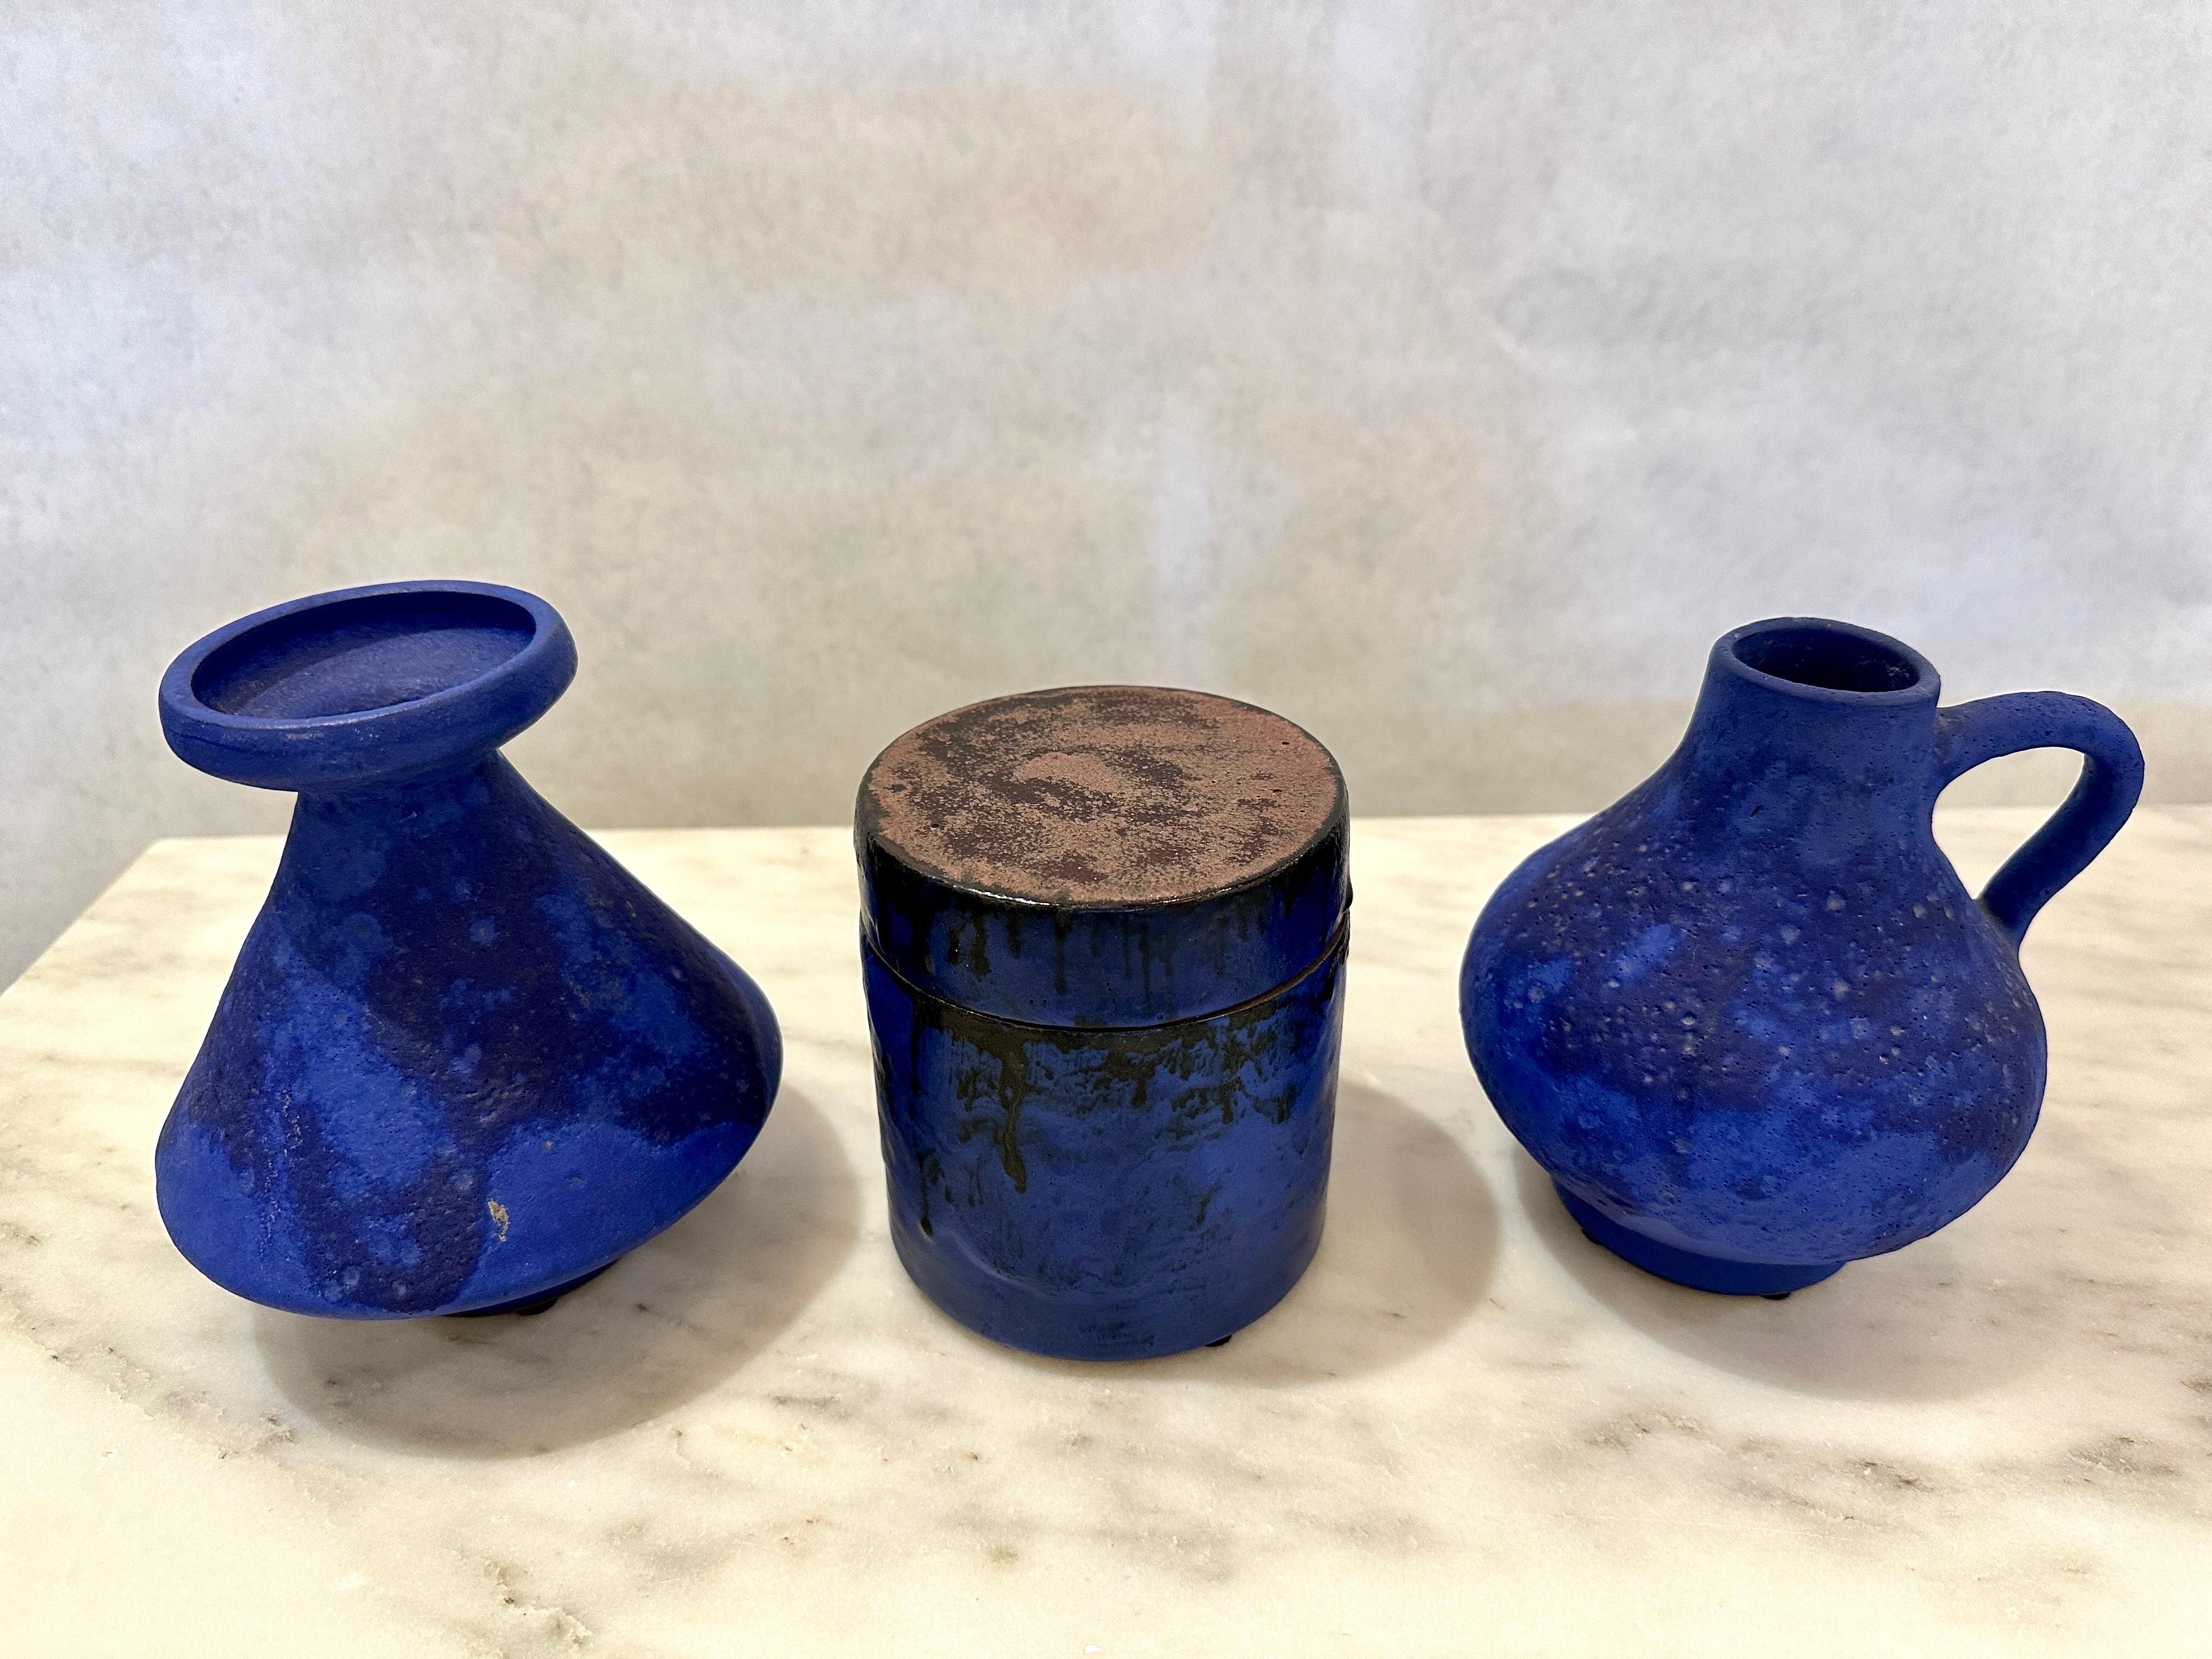 Ceramic Trio of Yves Klein Blue 1960's West German Pottery (3 Pieces) For Sale